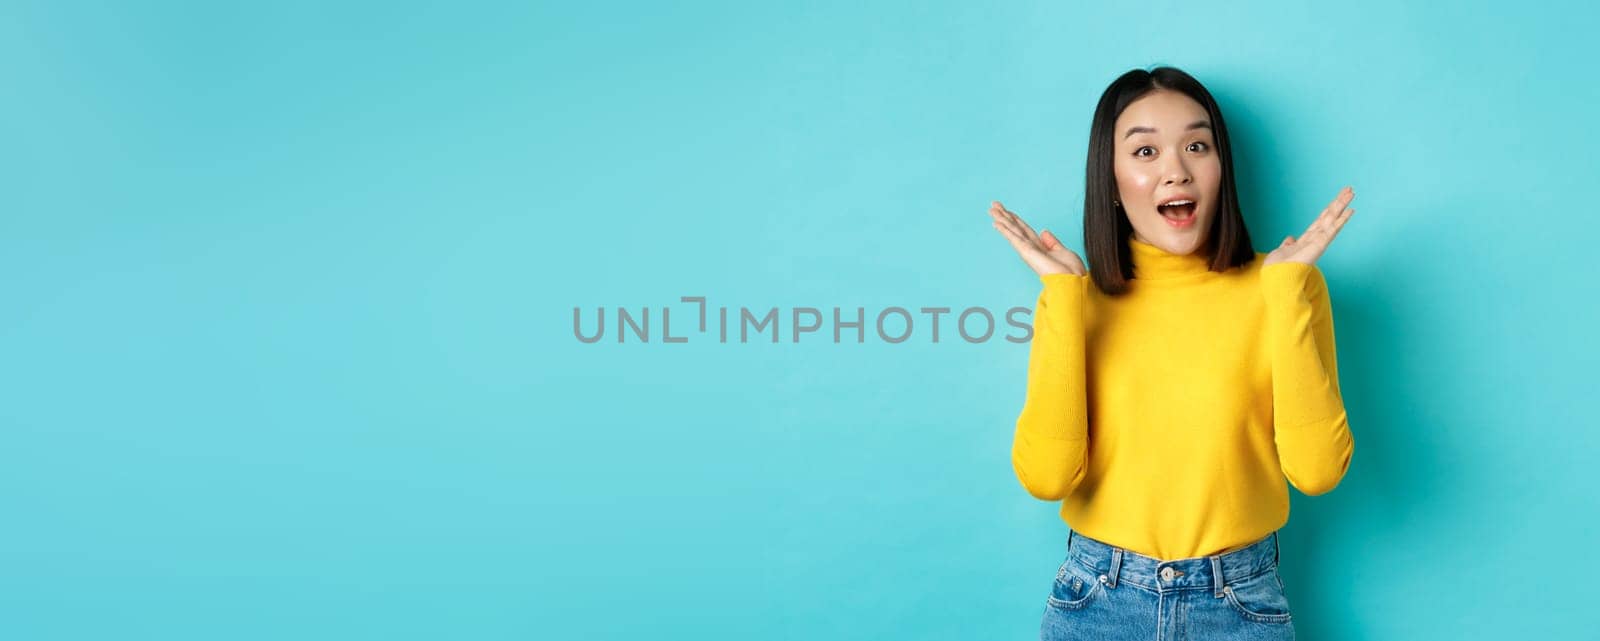 Beauty and fashion concept. Image of excited and surprised japanese girl saying wow with amazement, raising hands up near face, standing against blue background.